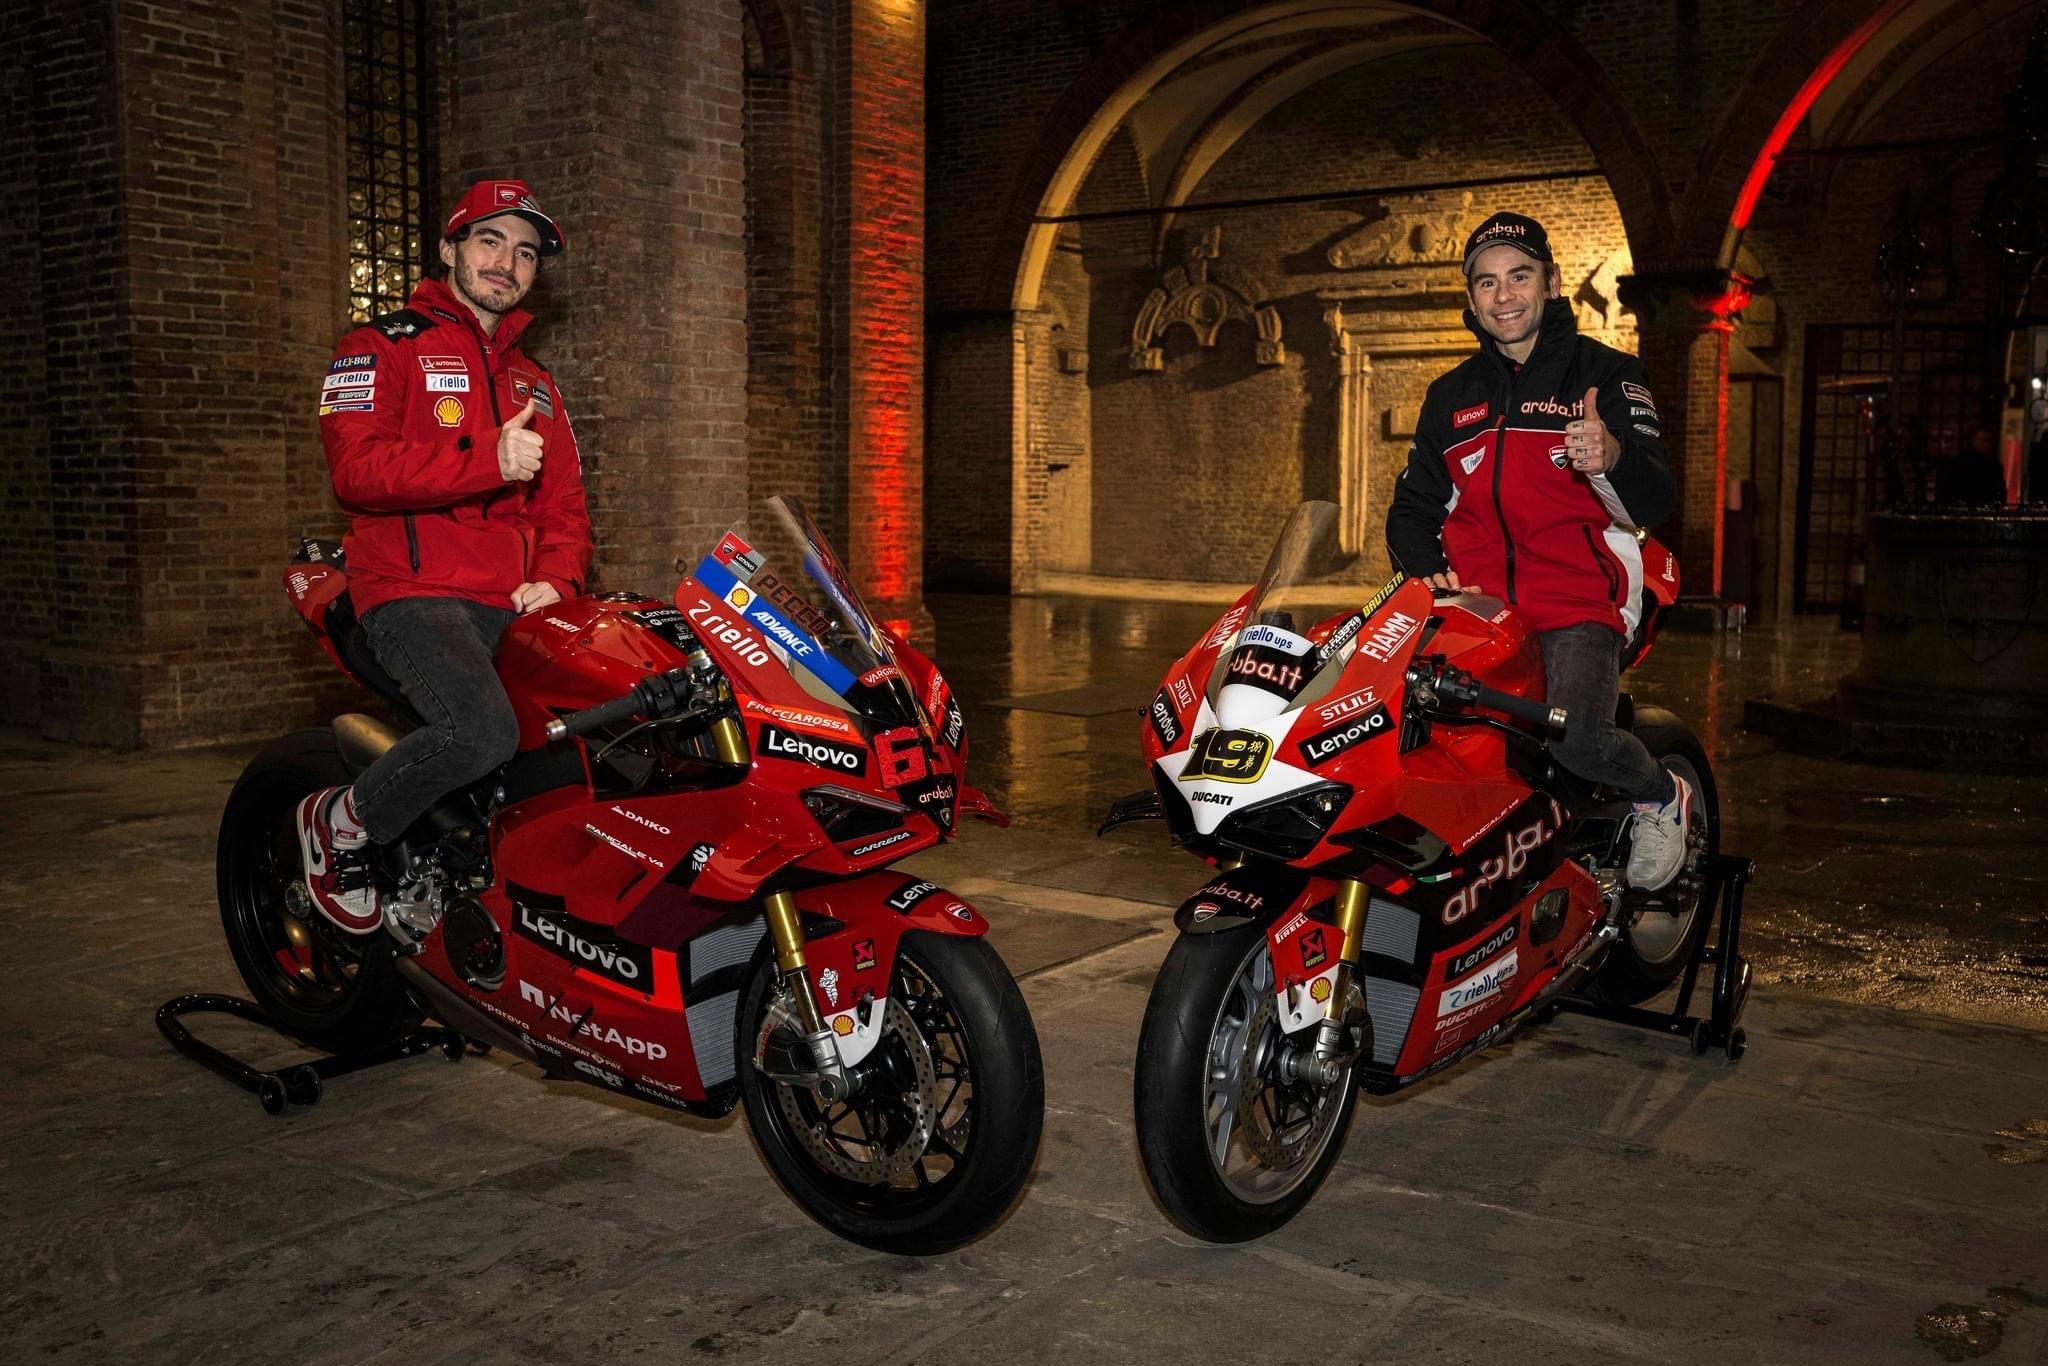 Ducati have unveiled their World Champion Replicas - MotoProWorks